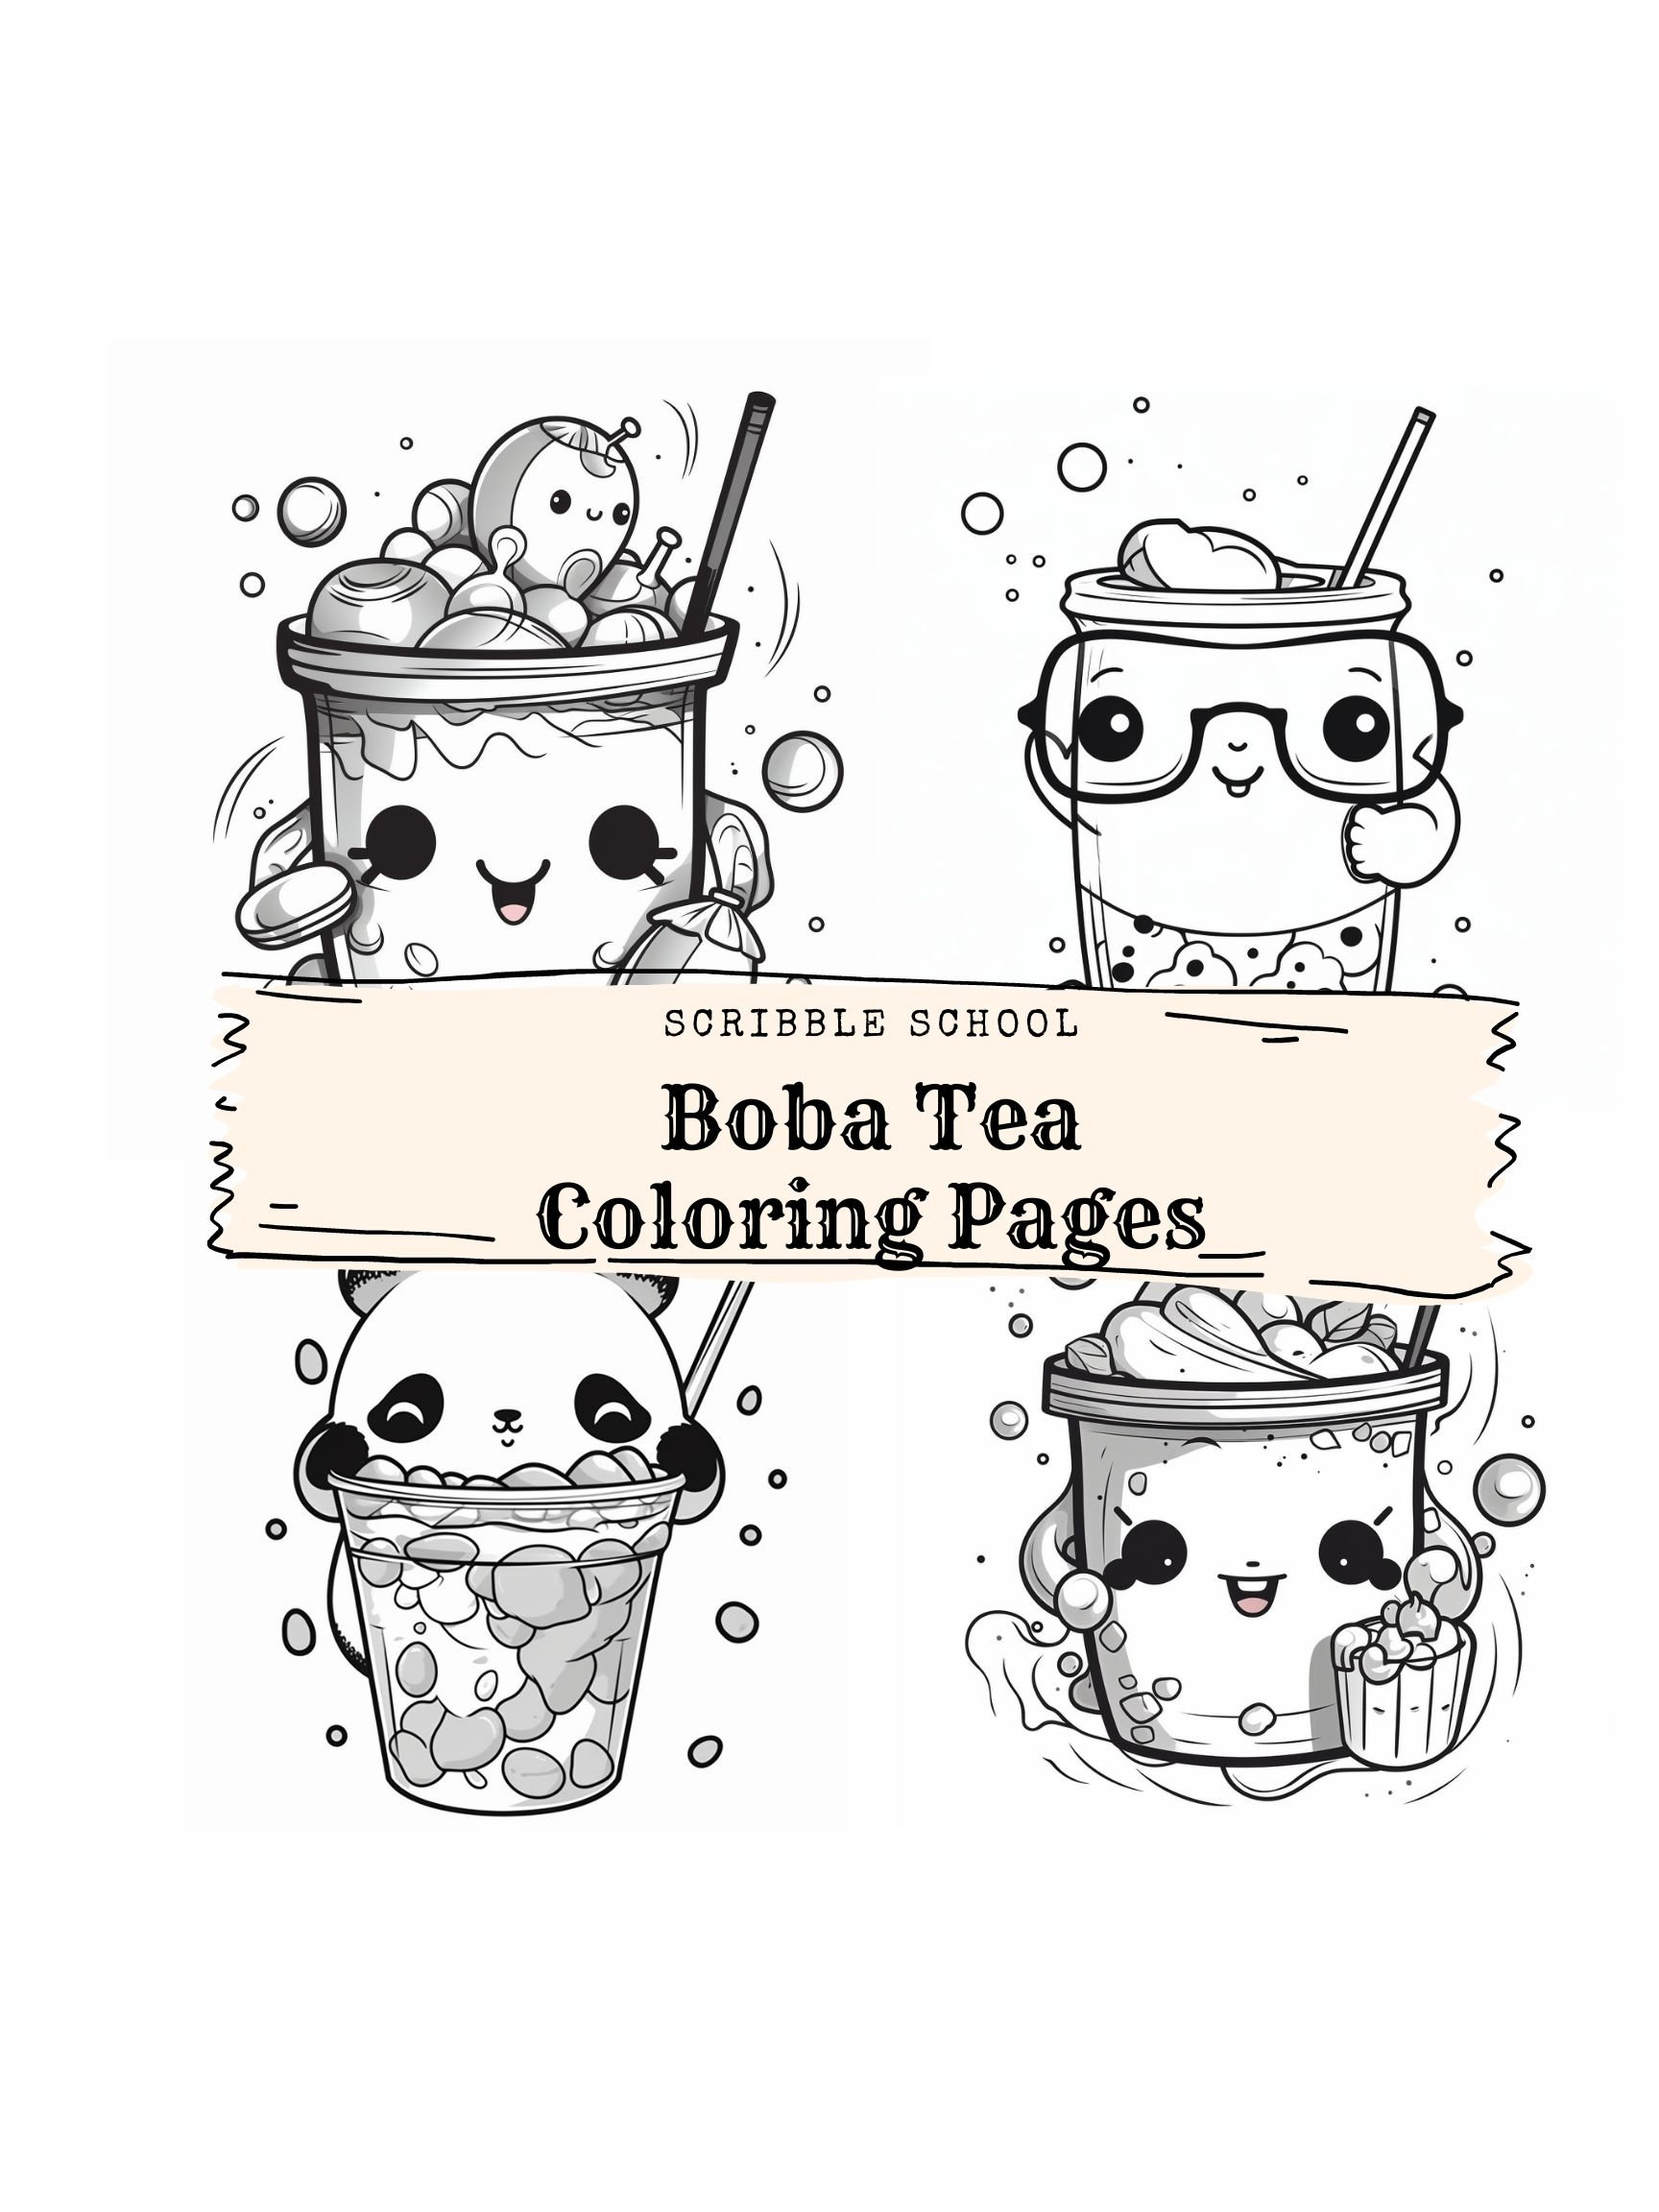 Boba Tea Coloring Pages Etsy